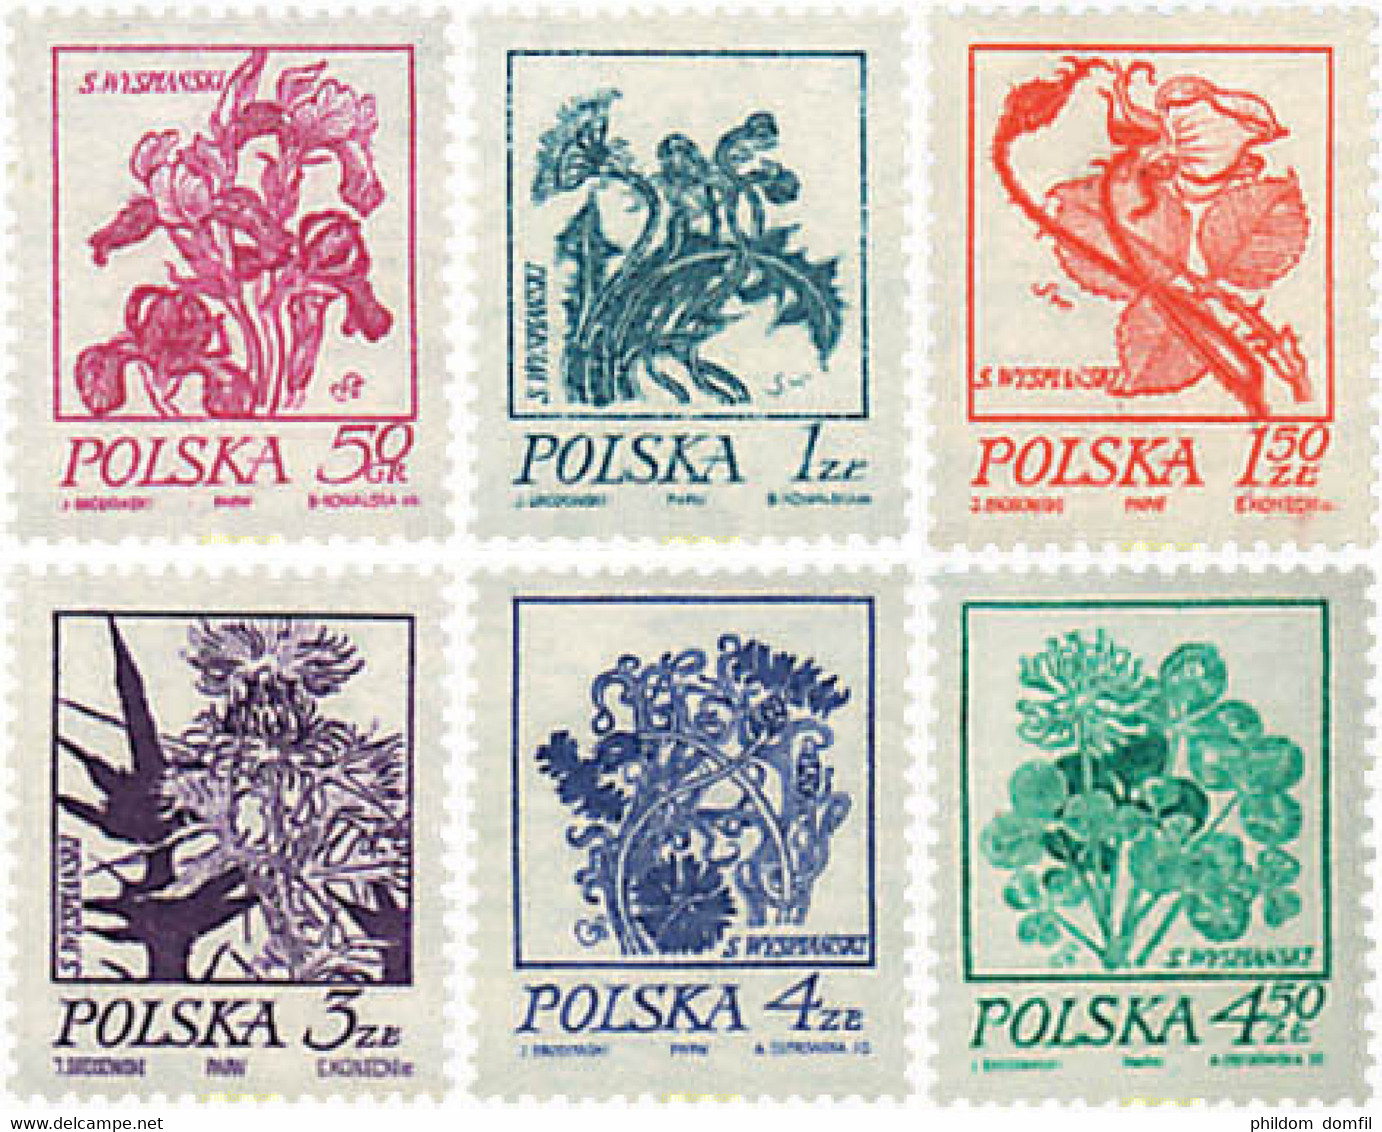 94367 MNH POLONIA 1974 FLORES - Unclassified